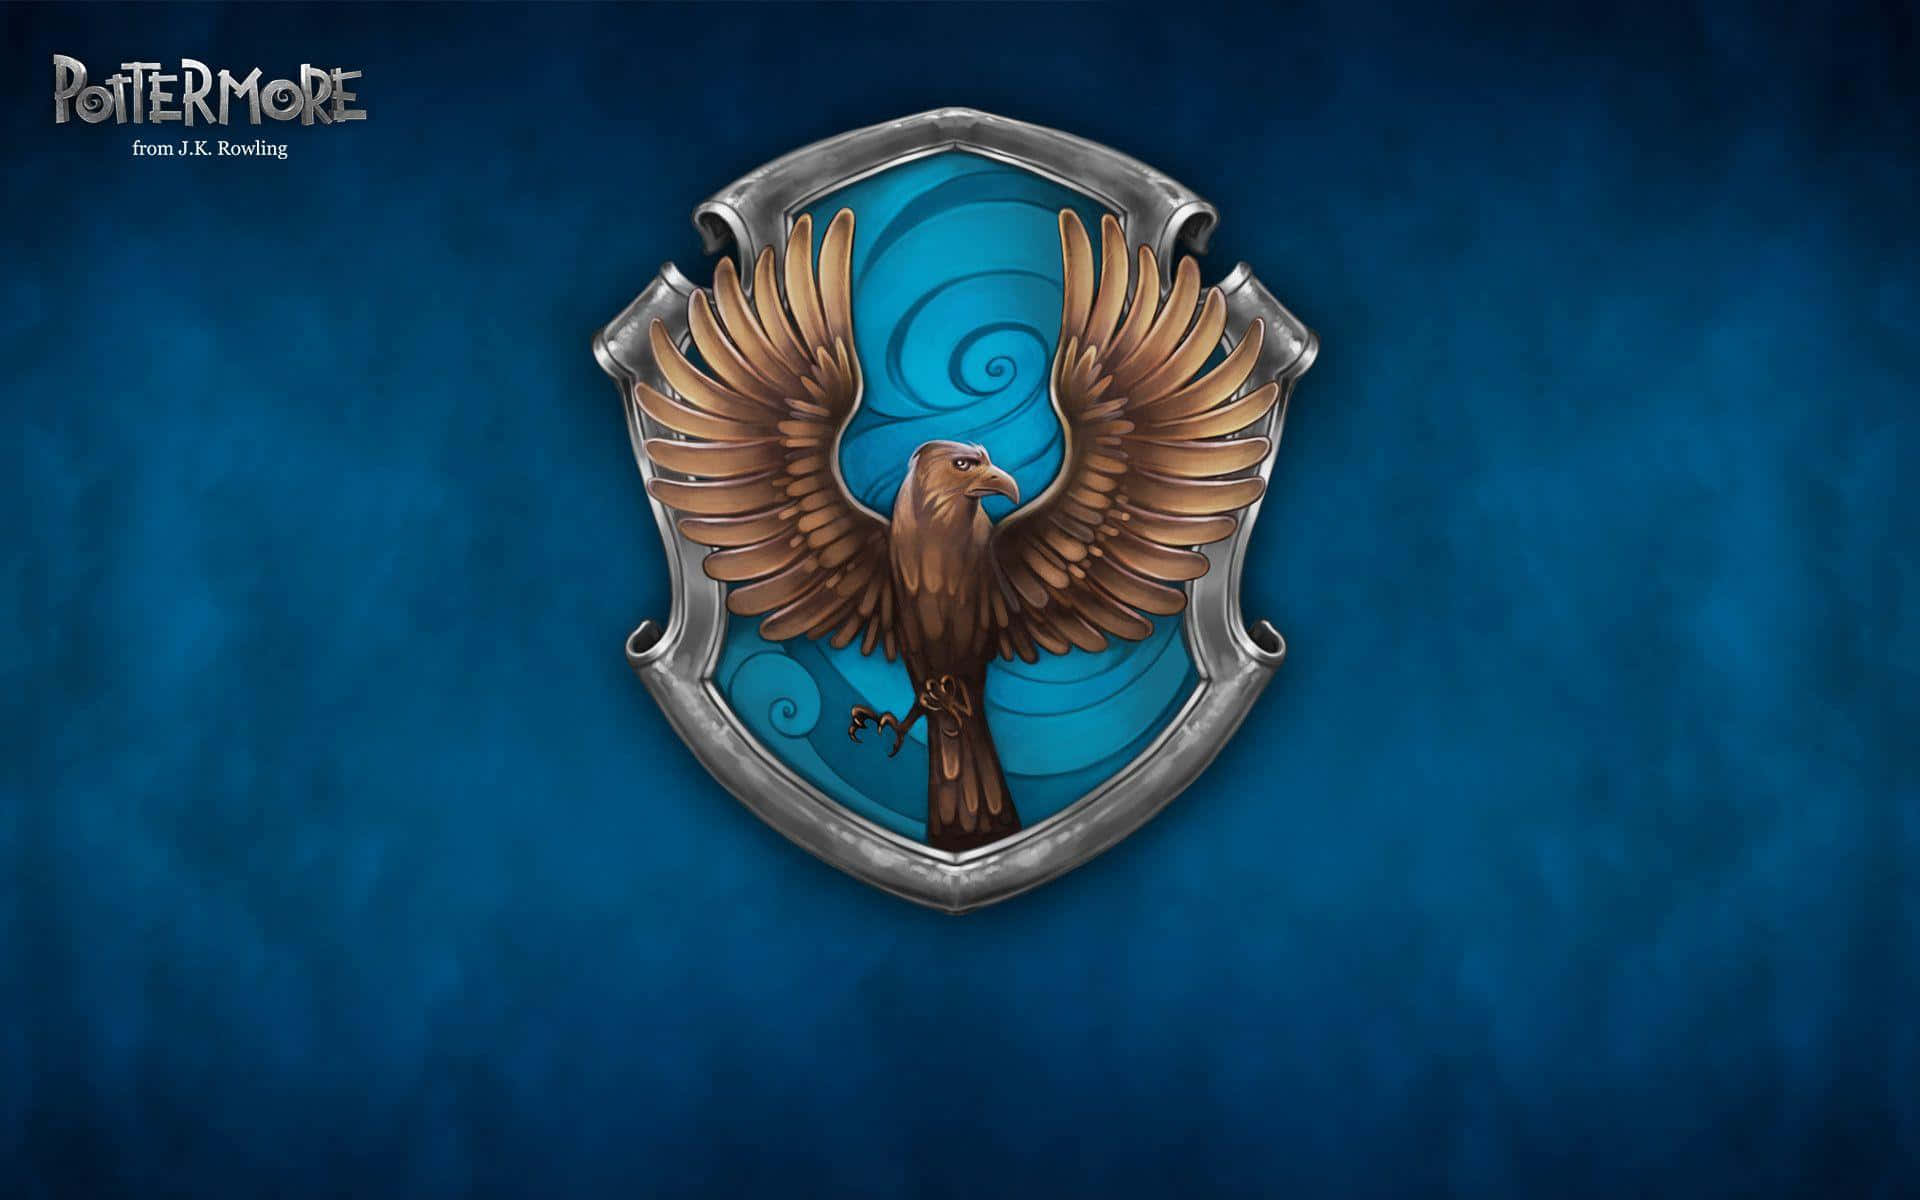 Join the House of Ravenclaw with Harry Potter Wallpaper